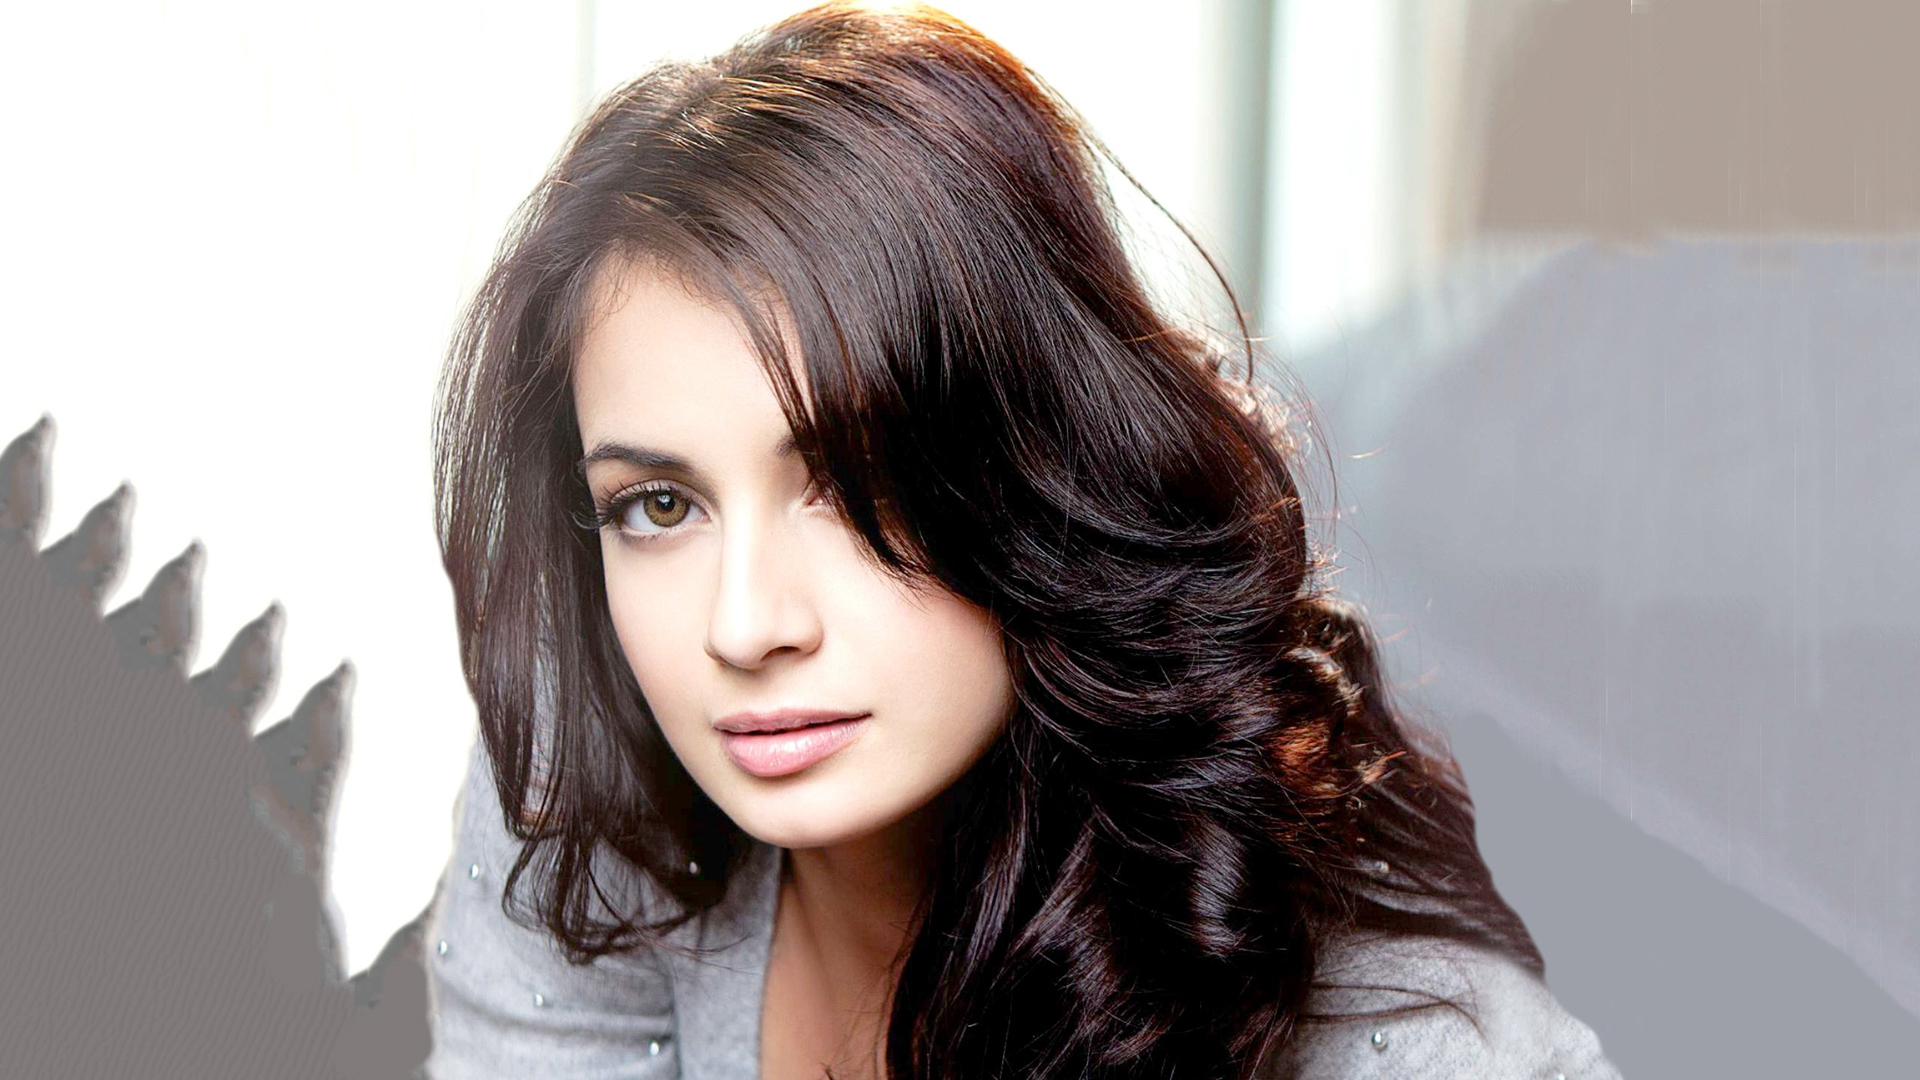 Dia Mirza Wallpaper Image Photos Pictures Background